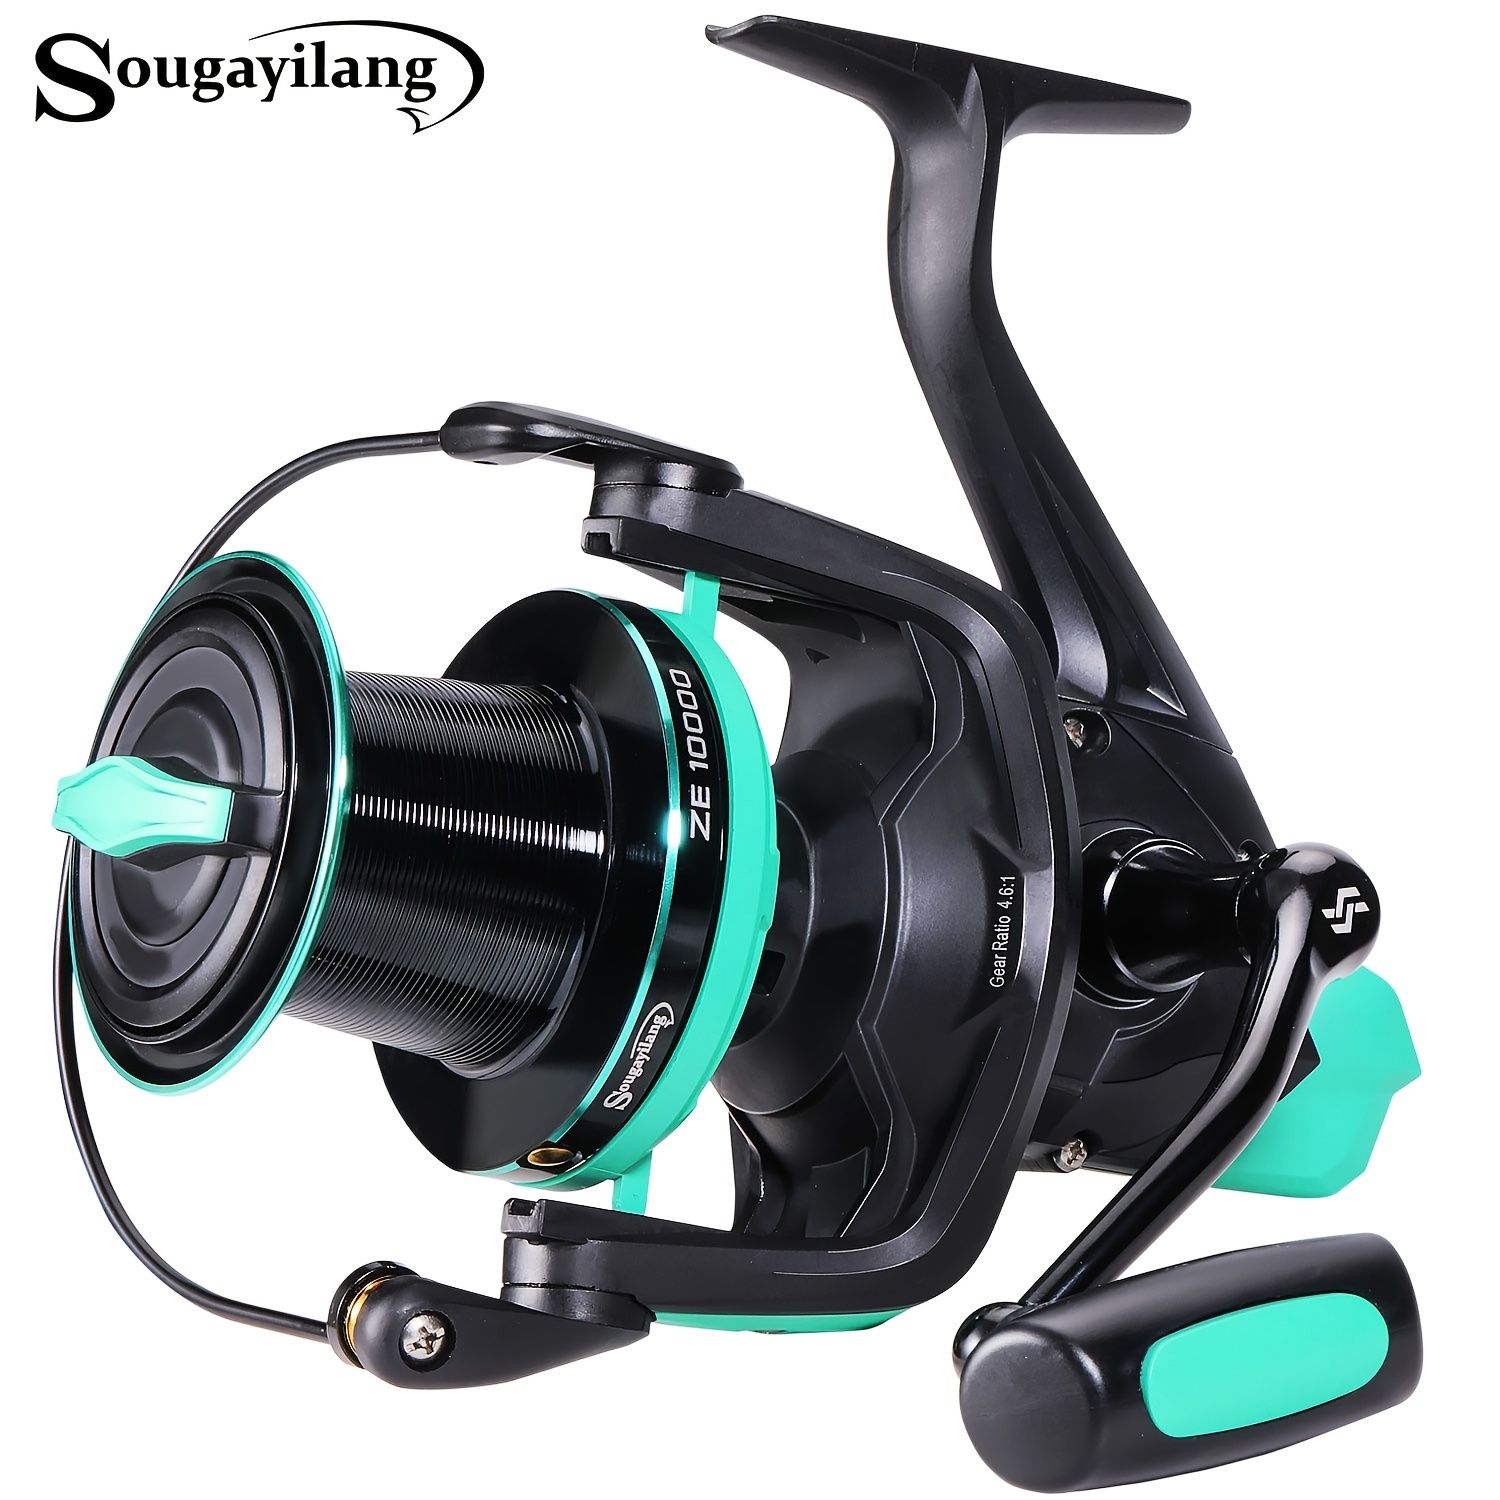 SOUGAYILANG Spinning Fishing Reel - Smooth and Durable ZE10000 with 11+1BB  Ball Bearings and 4.6:1 Gear Ratio